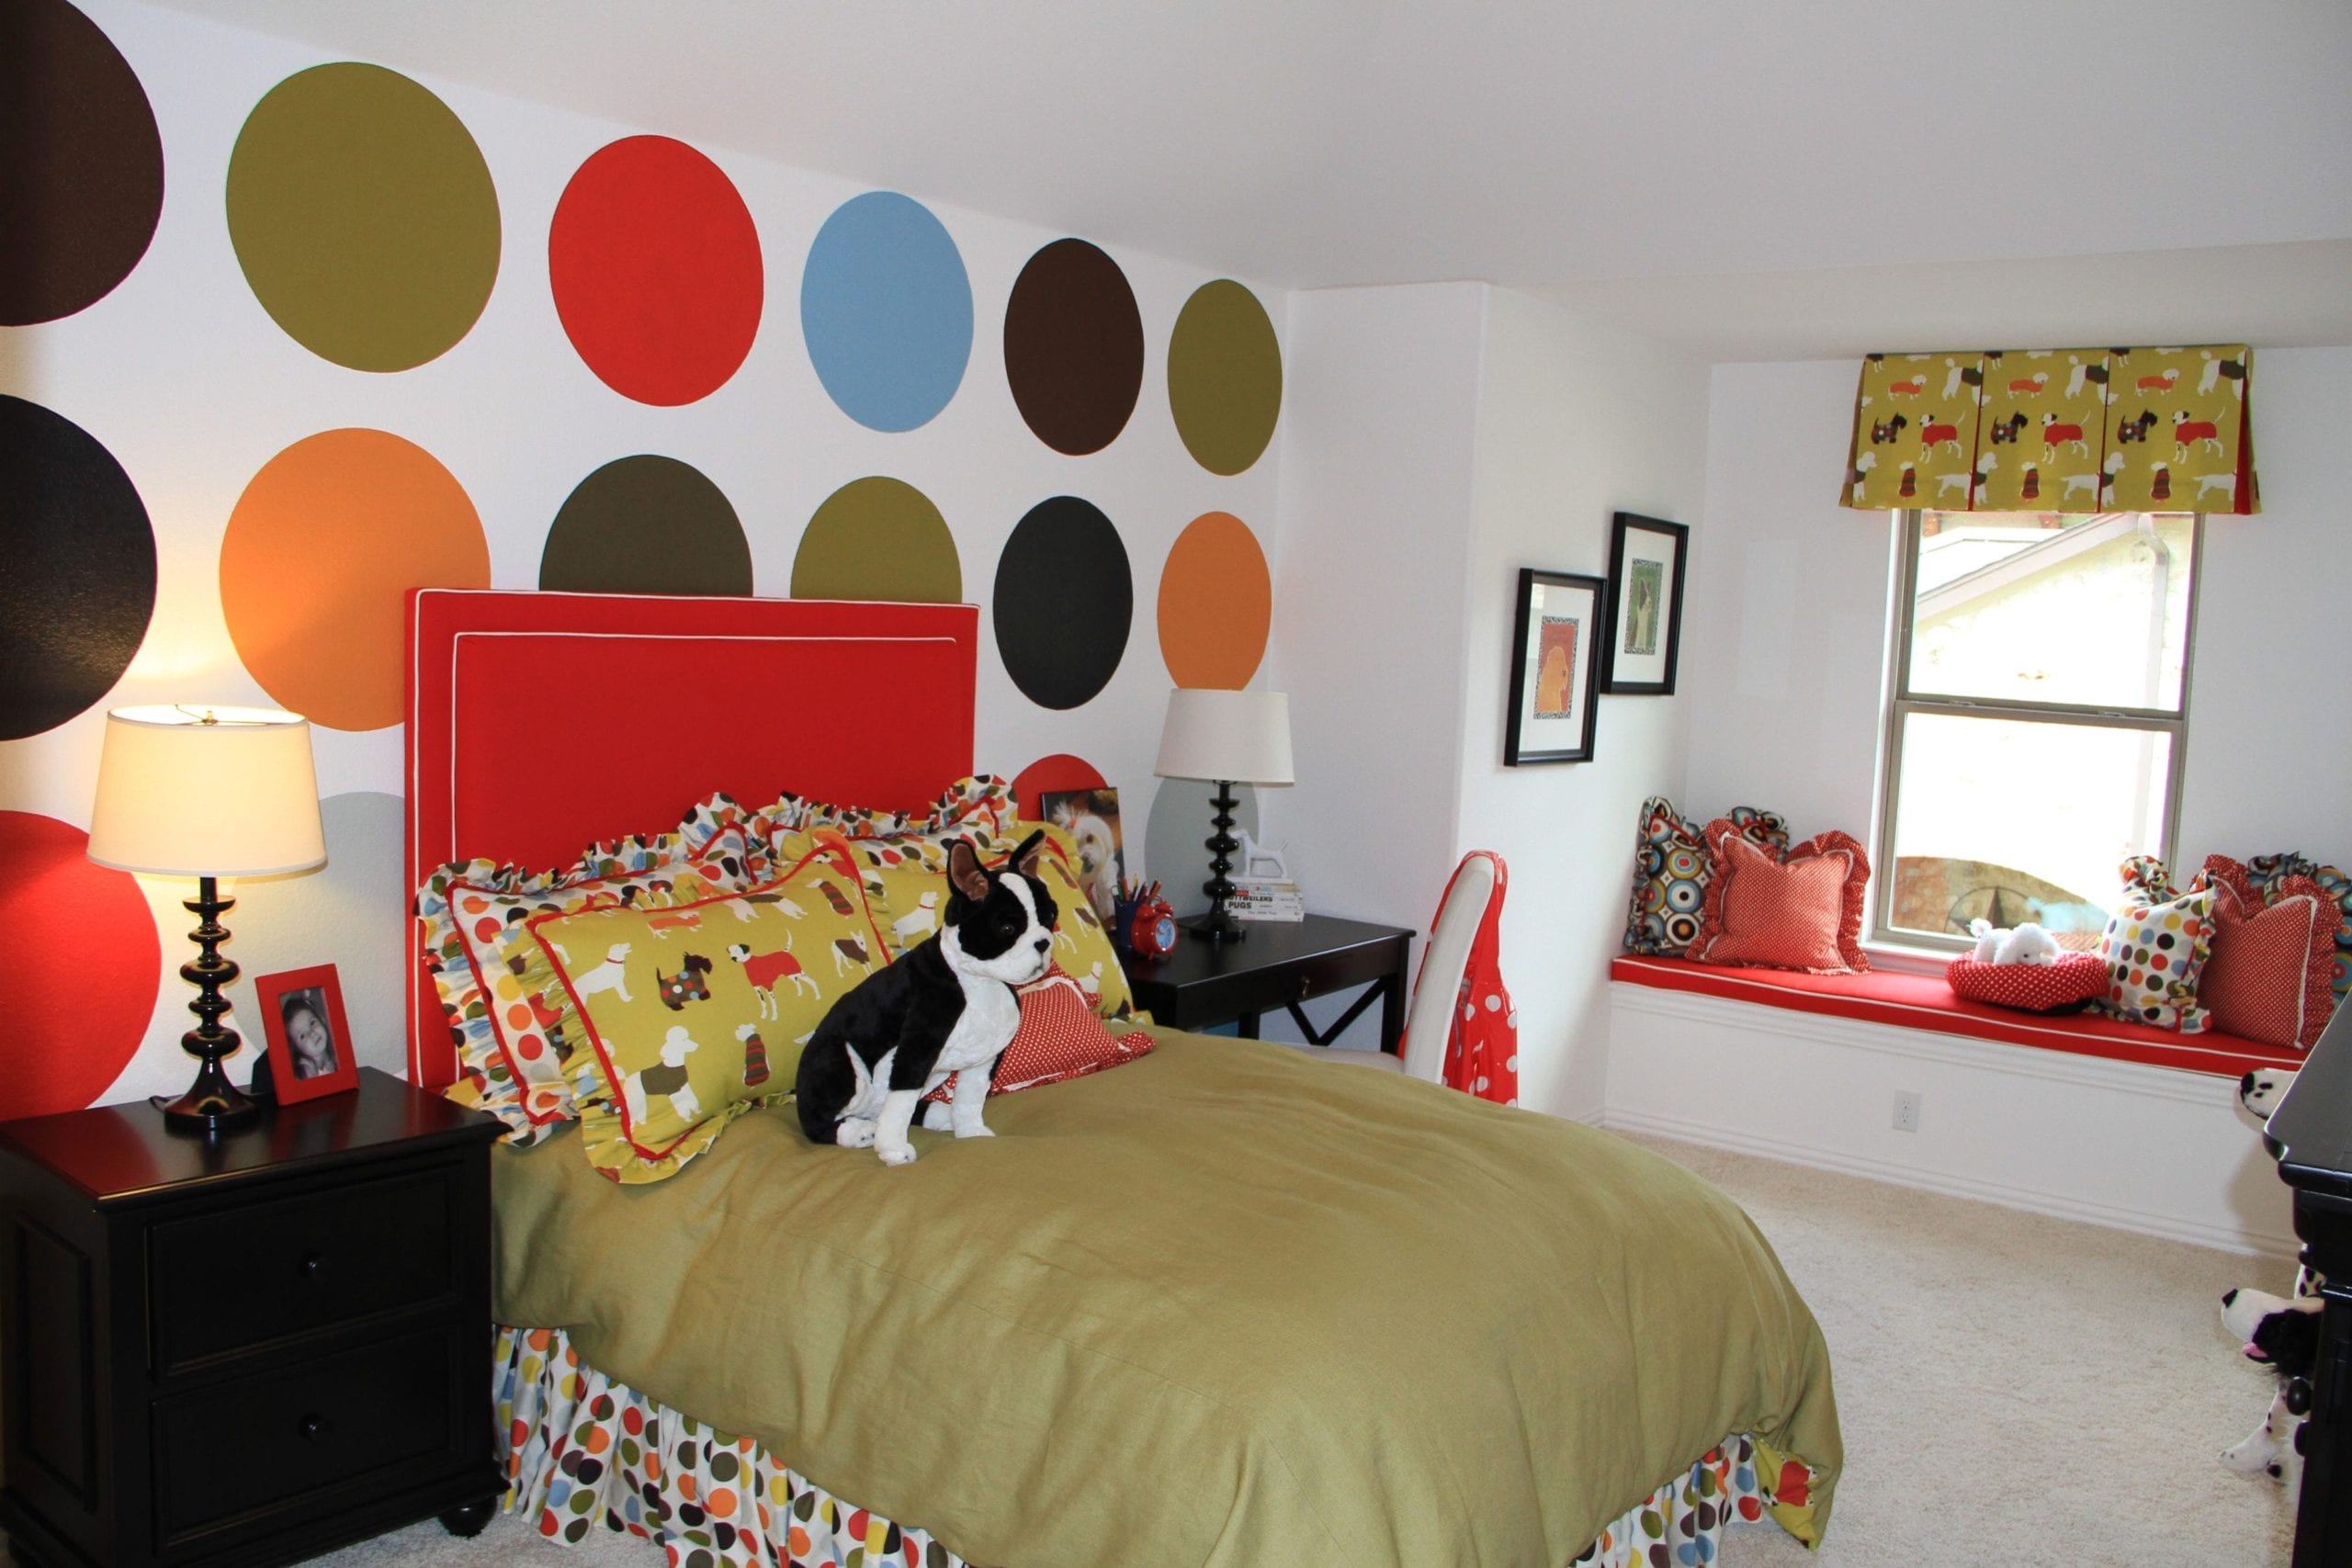 Image of a young girl's bedroom with painted polka dots in varied colors above the bed.